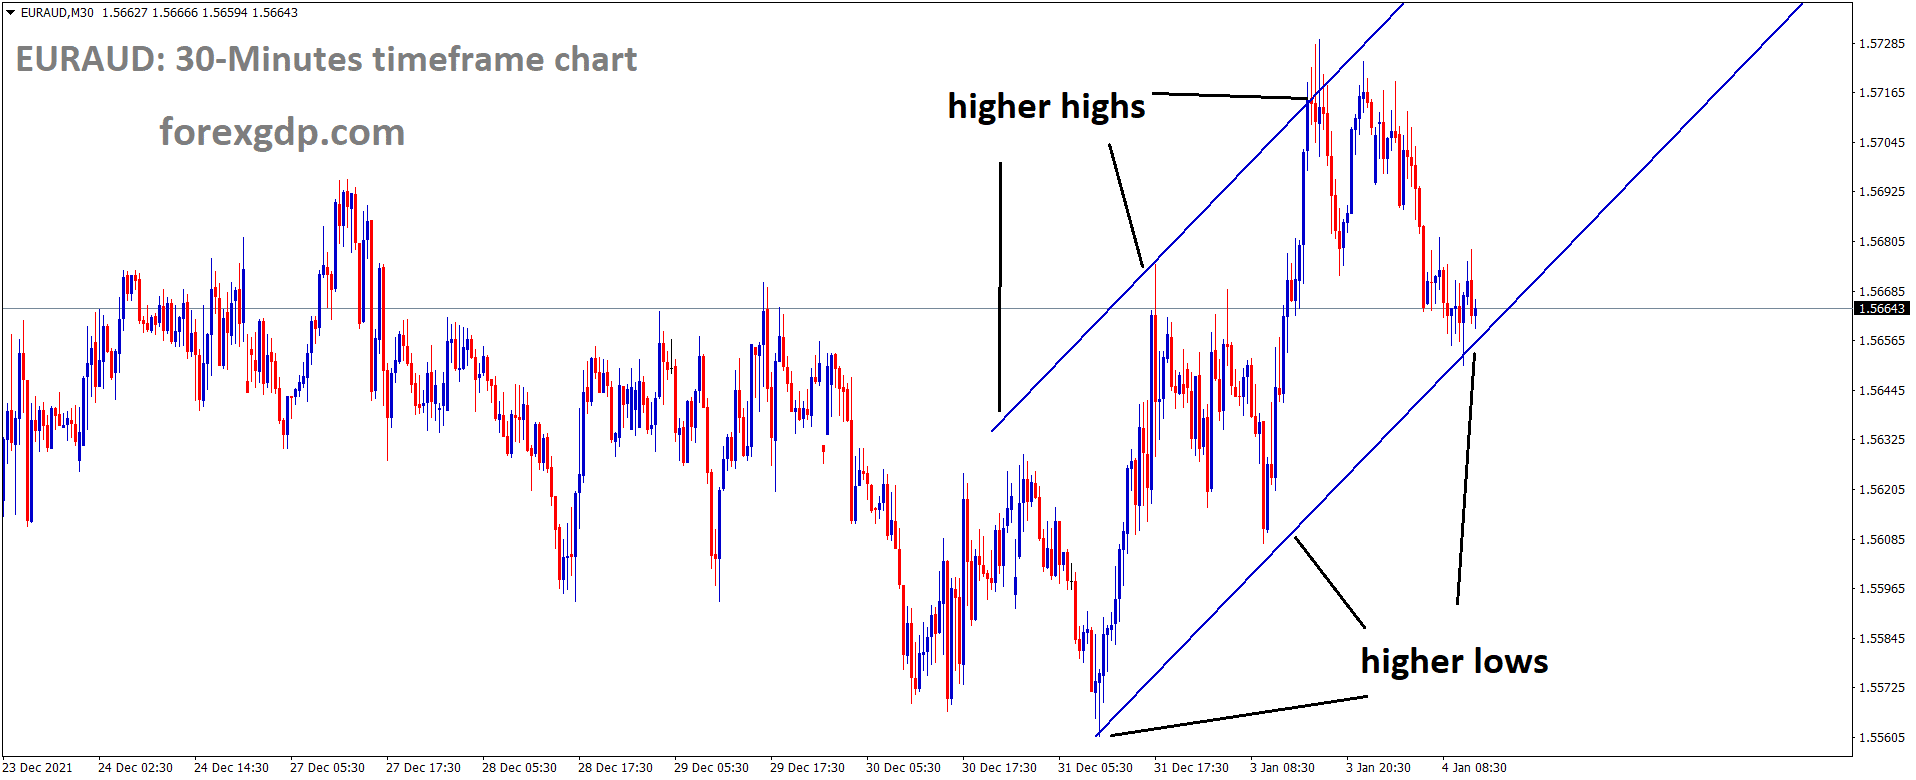 EURAUD is moving in an Ascending channel and the market has reached the higher low area of the Channel